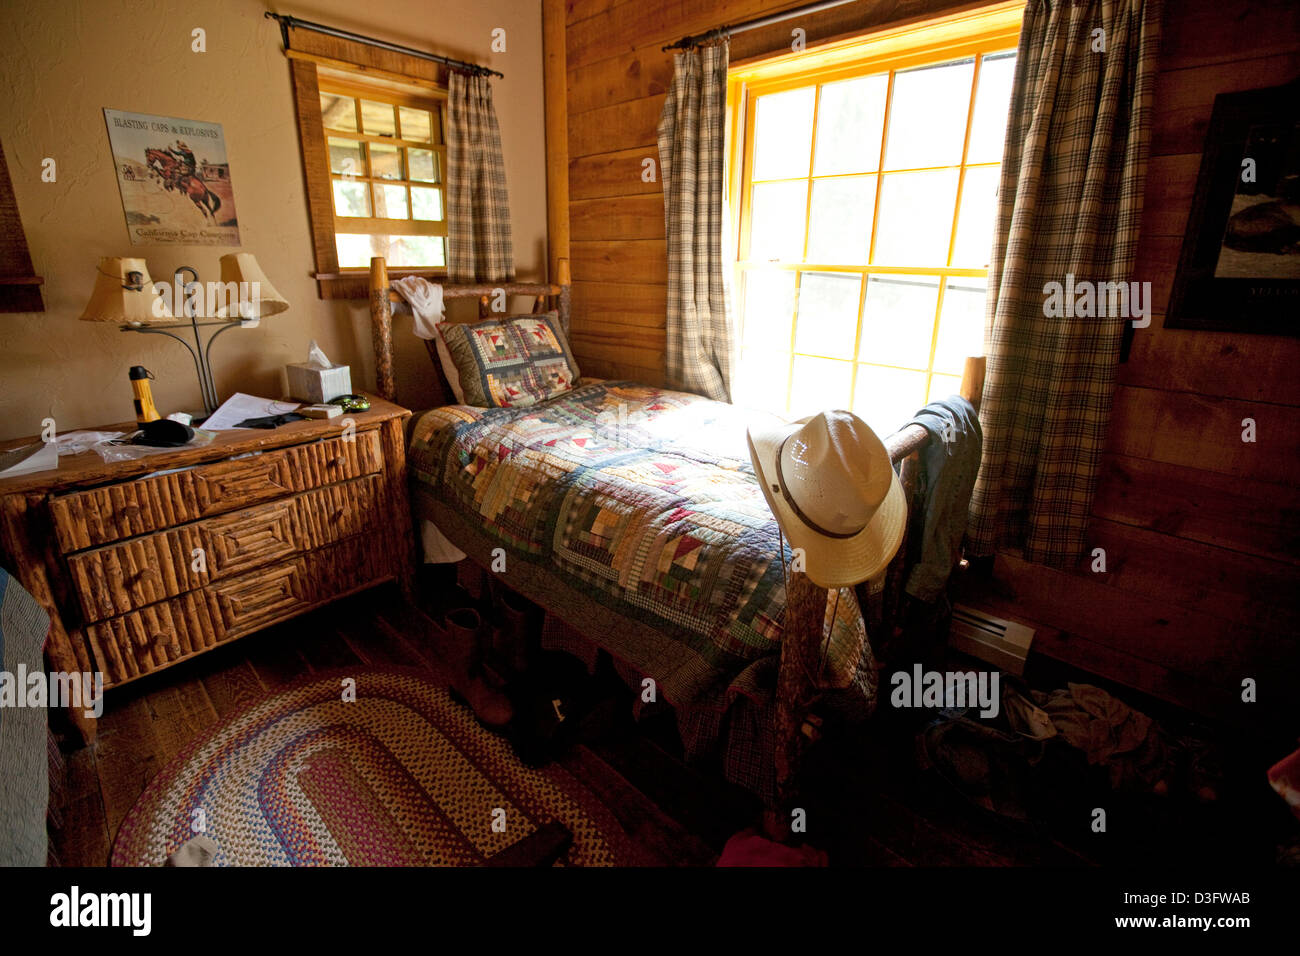 Cowgirls room in log cabin lodge on ranch in Montana, USA Stock Photo